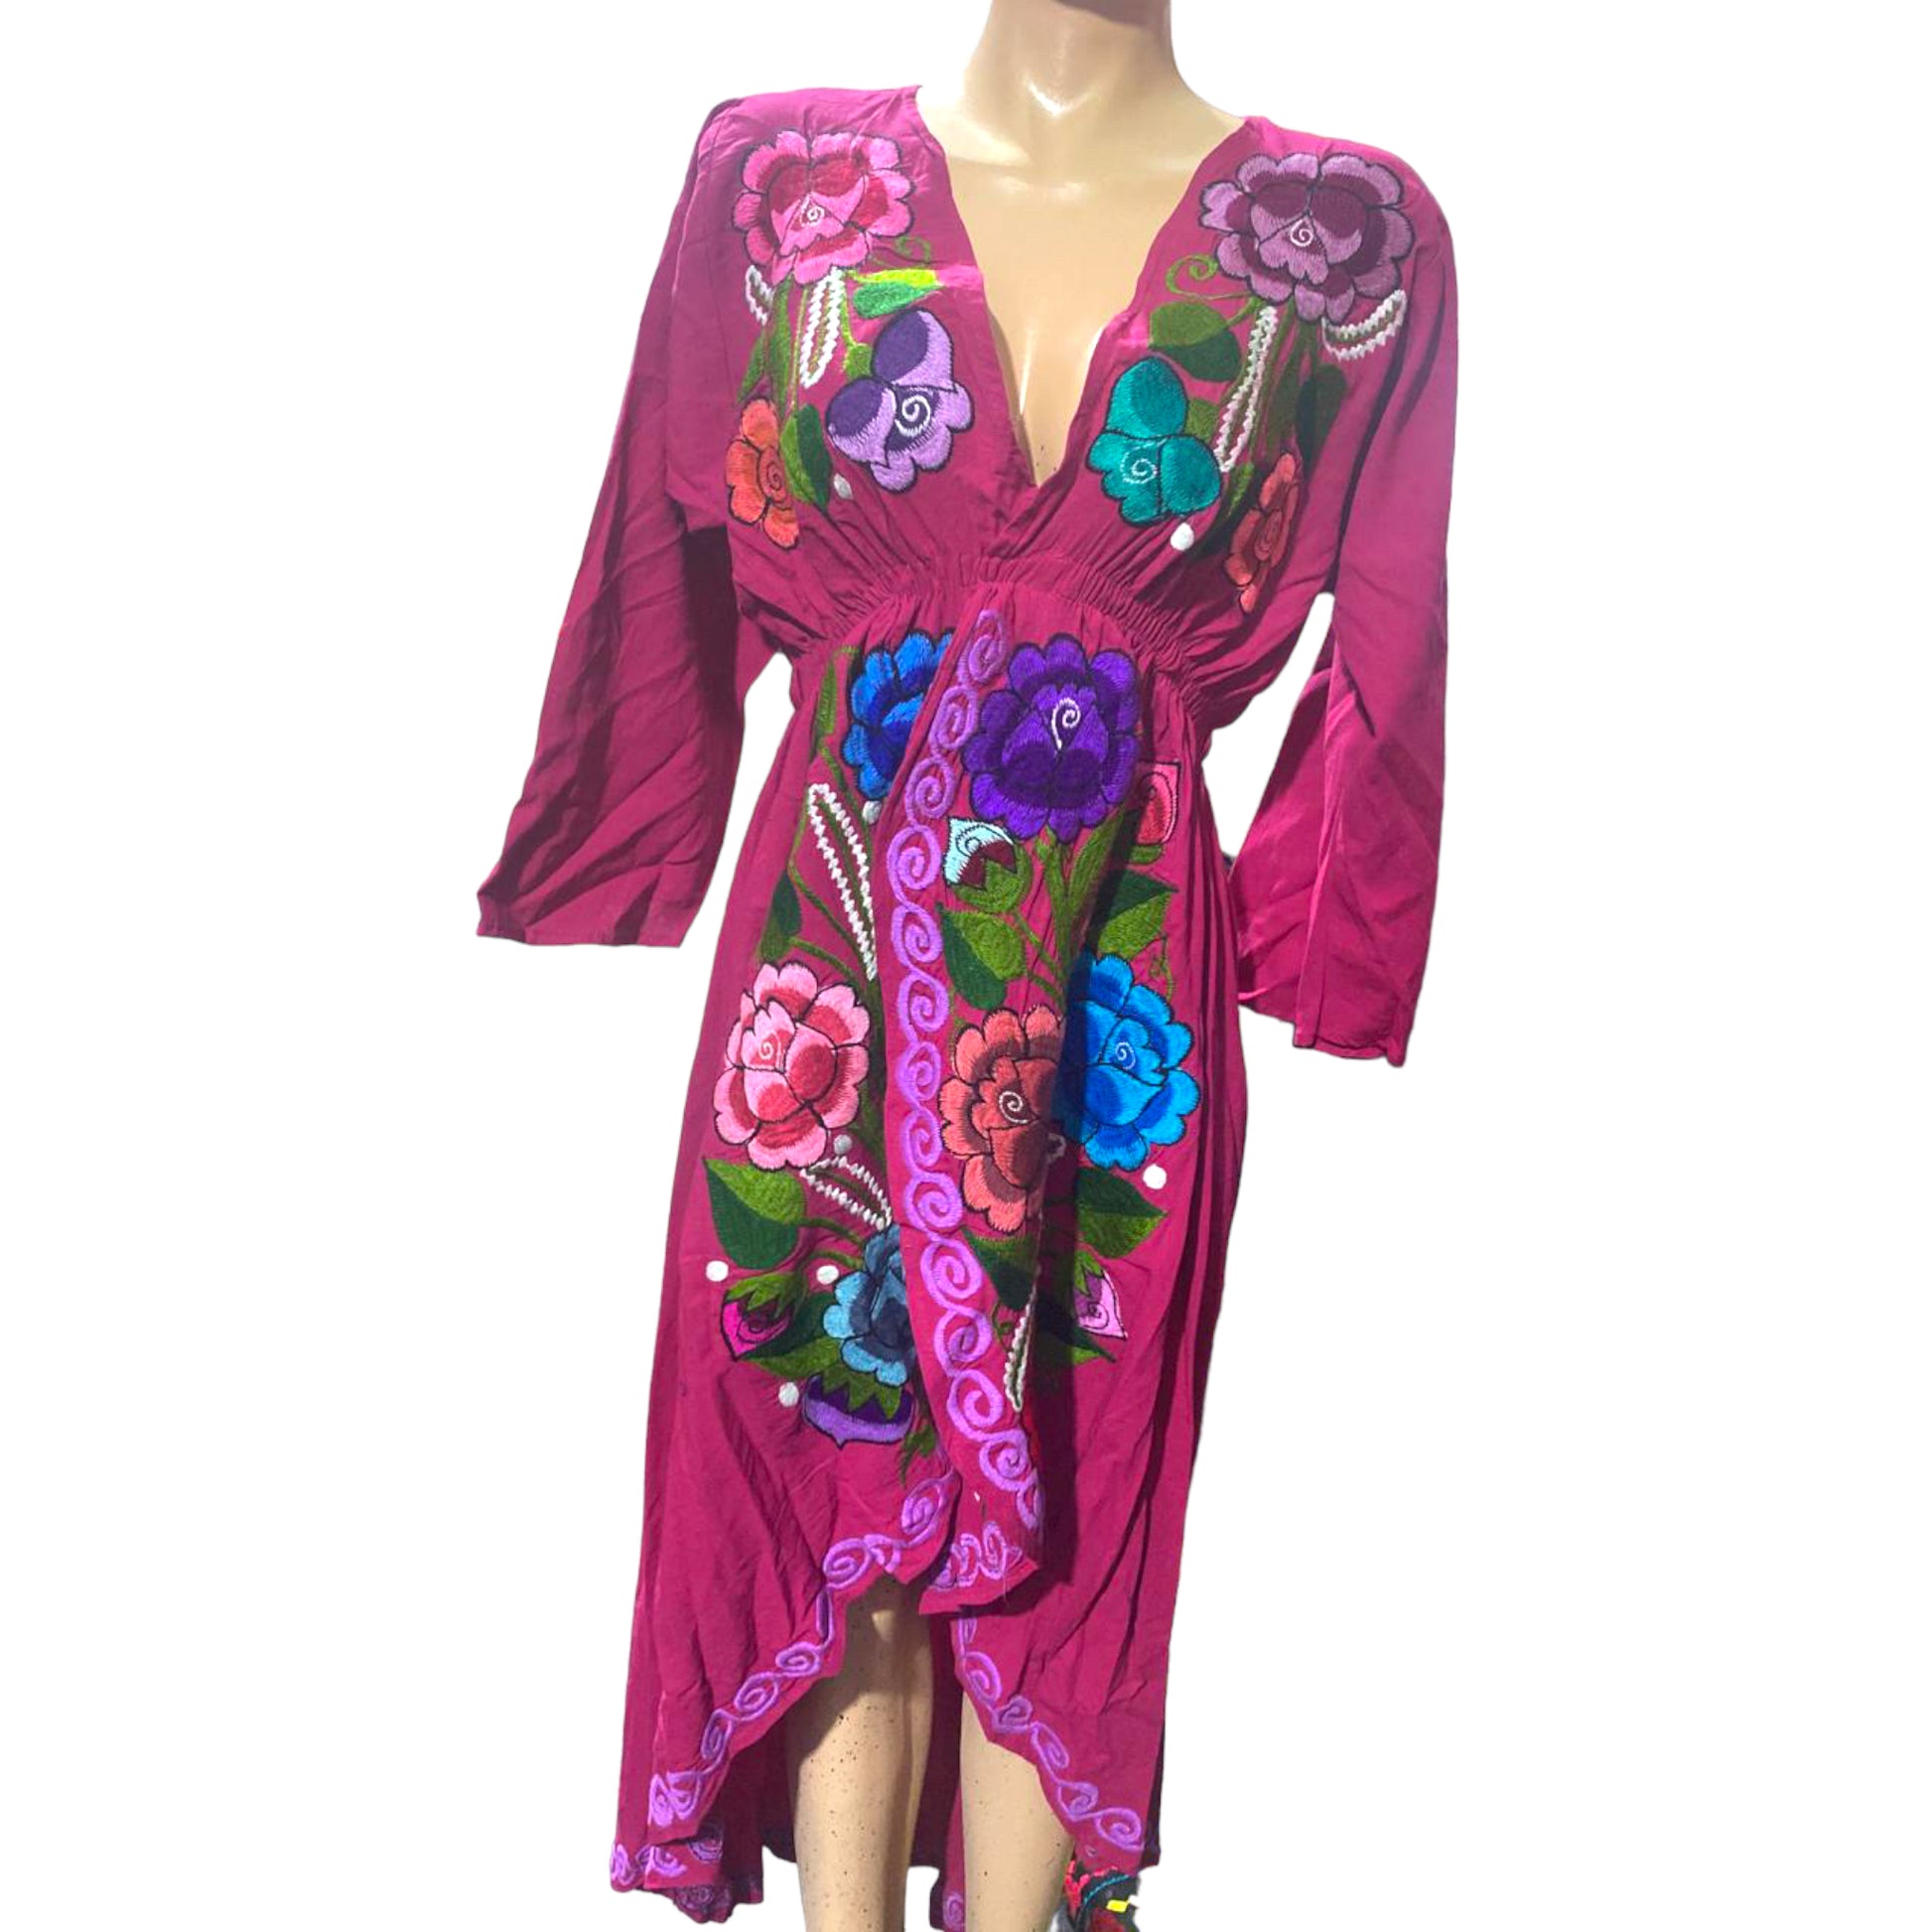 Pink long-tailed dress with embroidered flowers of different sizes in purple and blue.